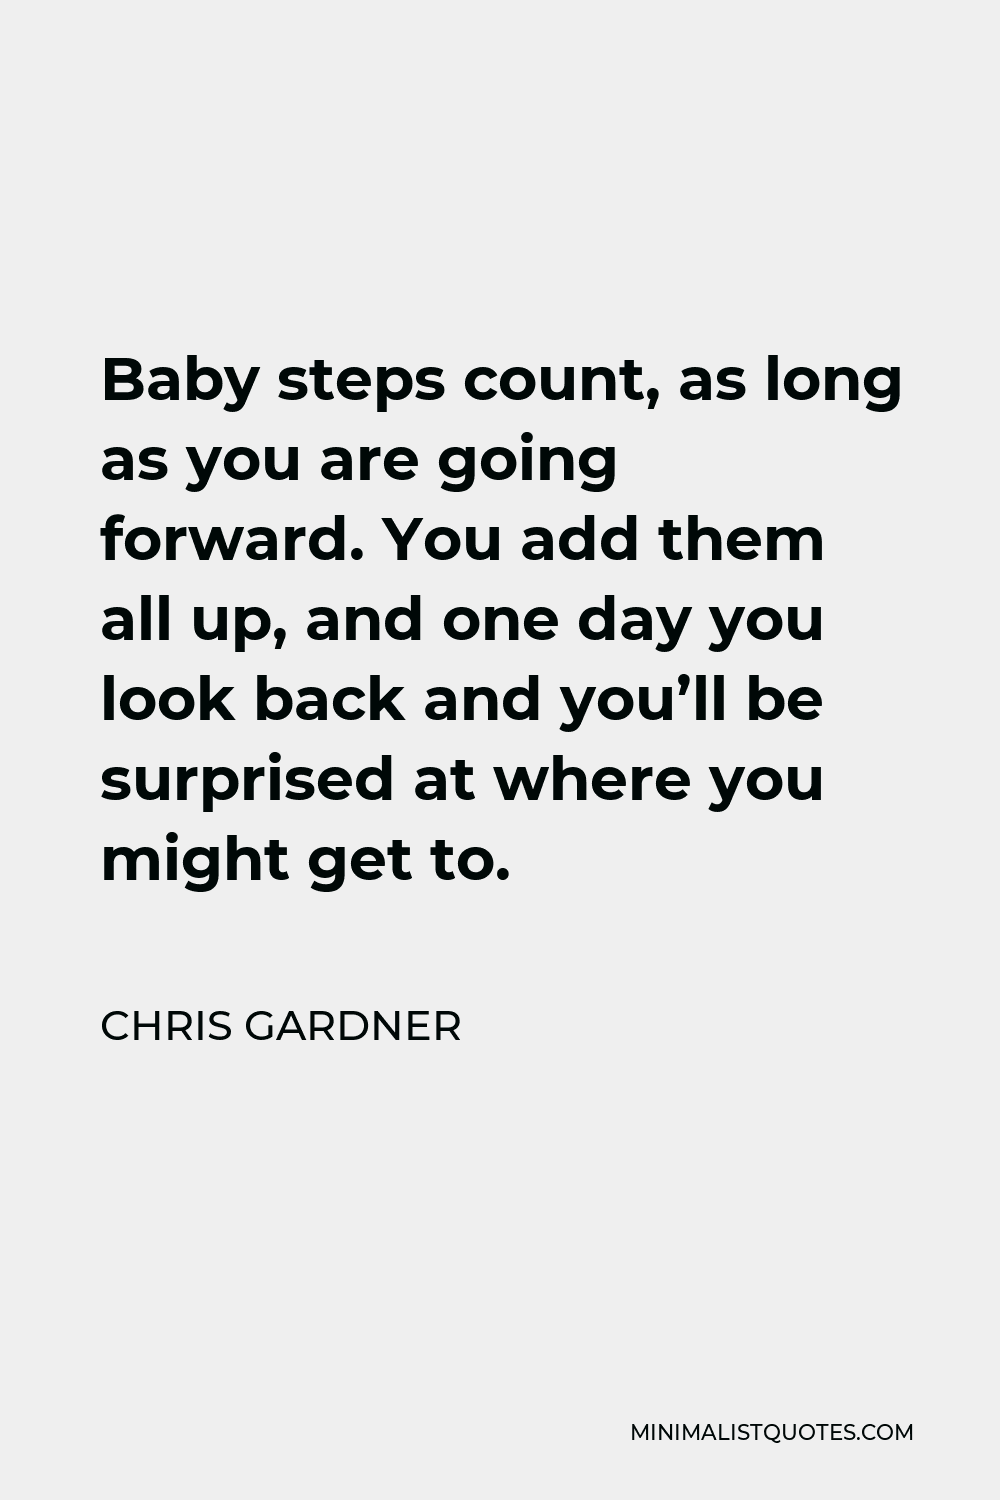 Chris Gardner Quote - Baby steps count, as long as you are going forward. You add them all up, and one day you look back and you’ll be surprised at where you might get to.